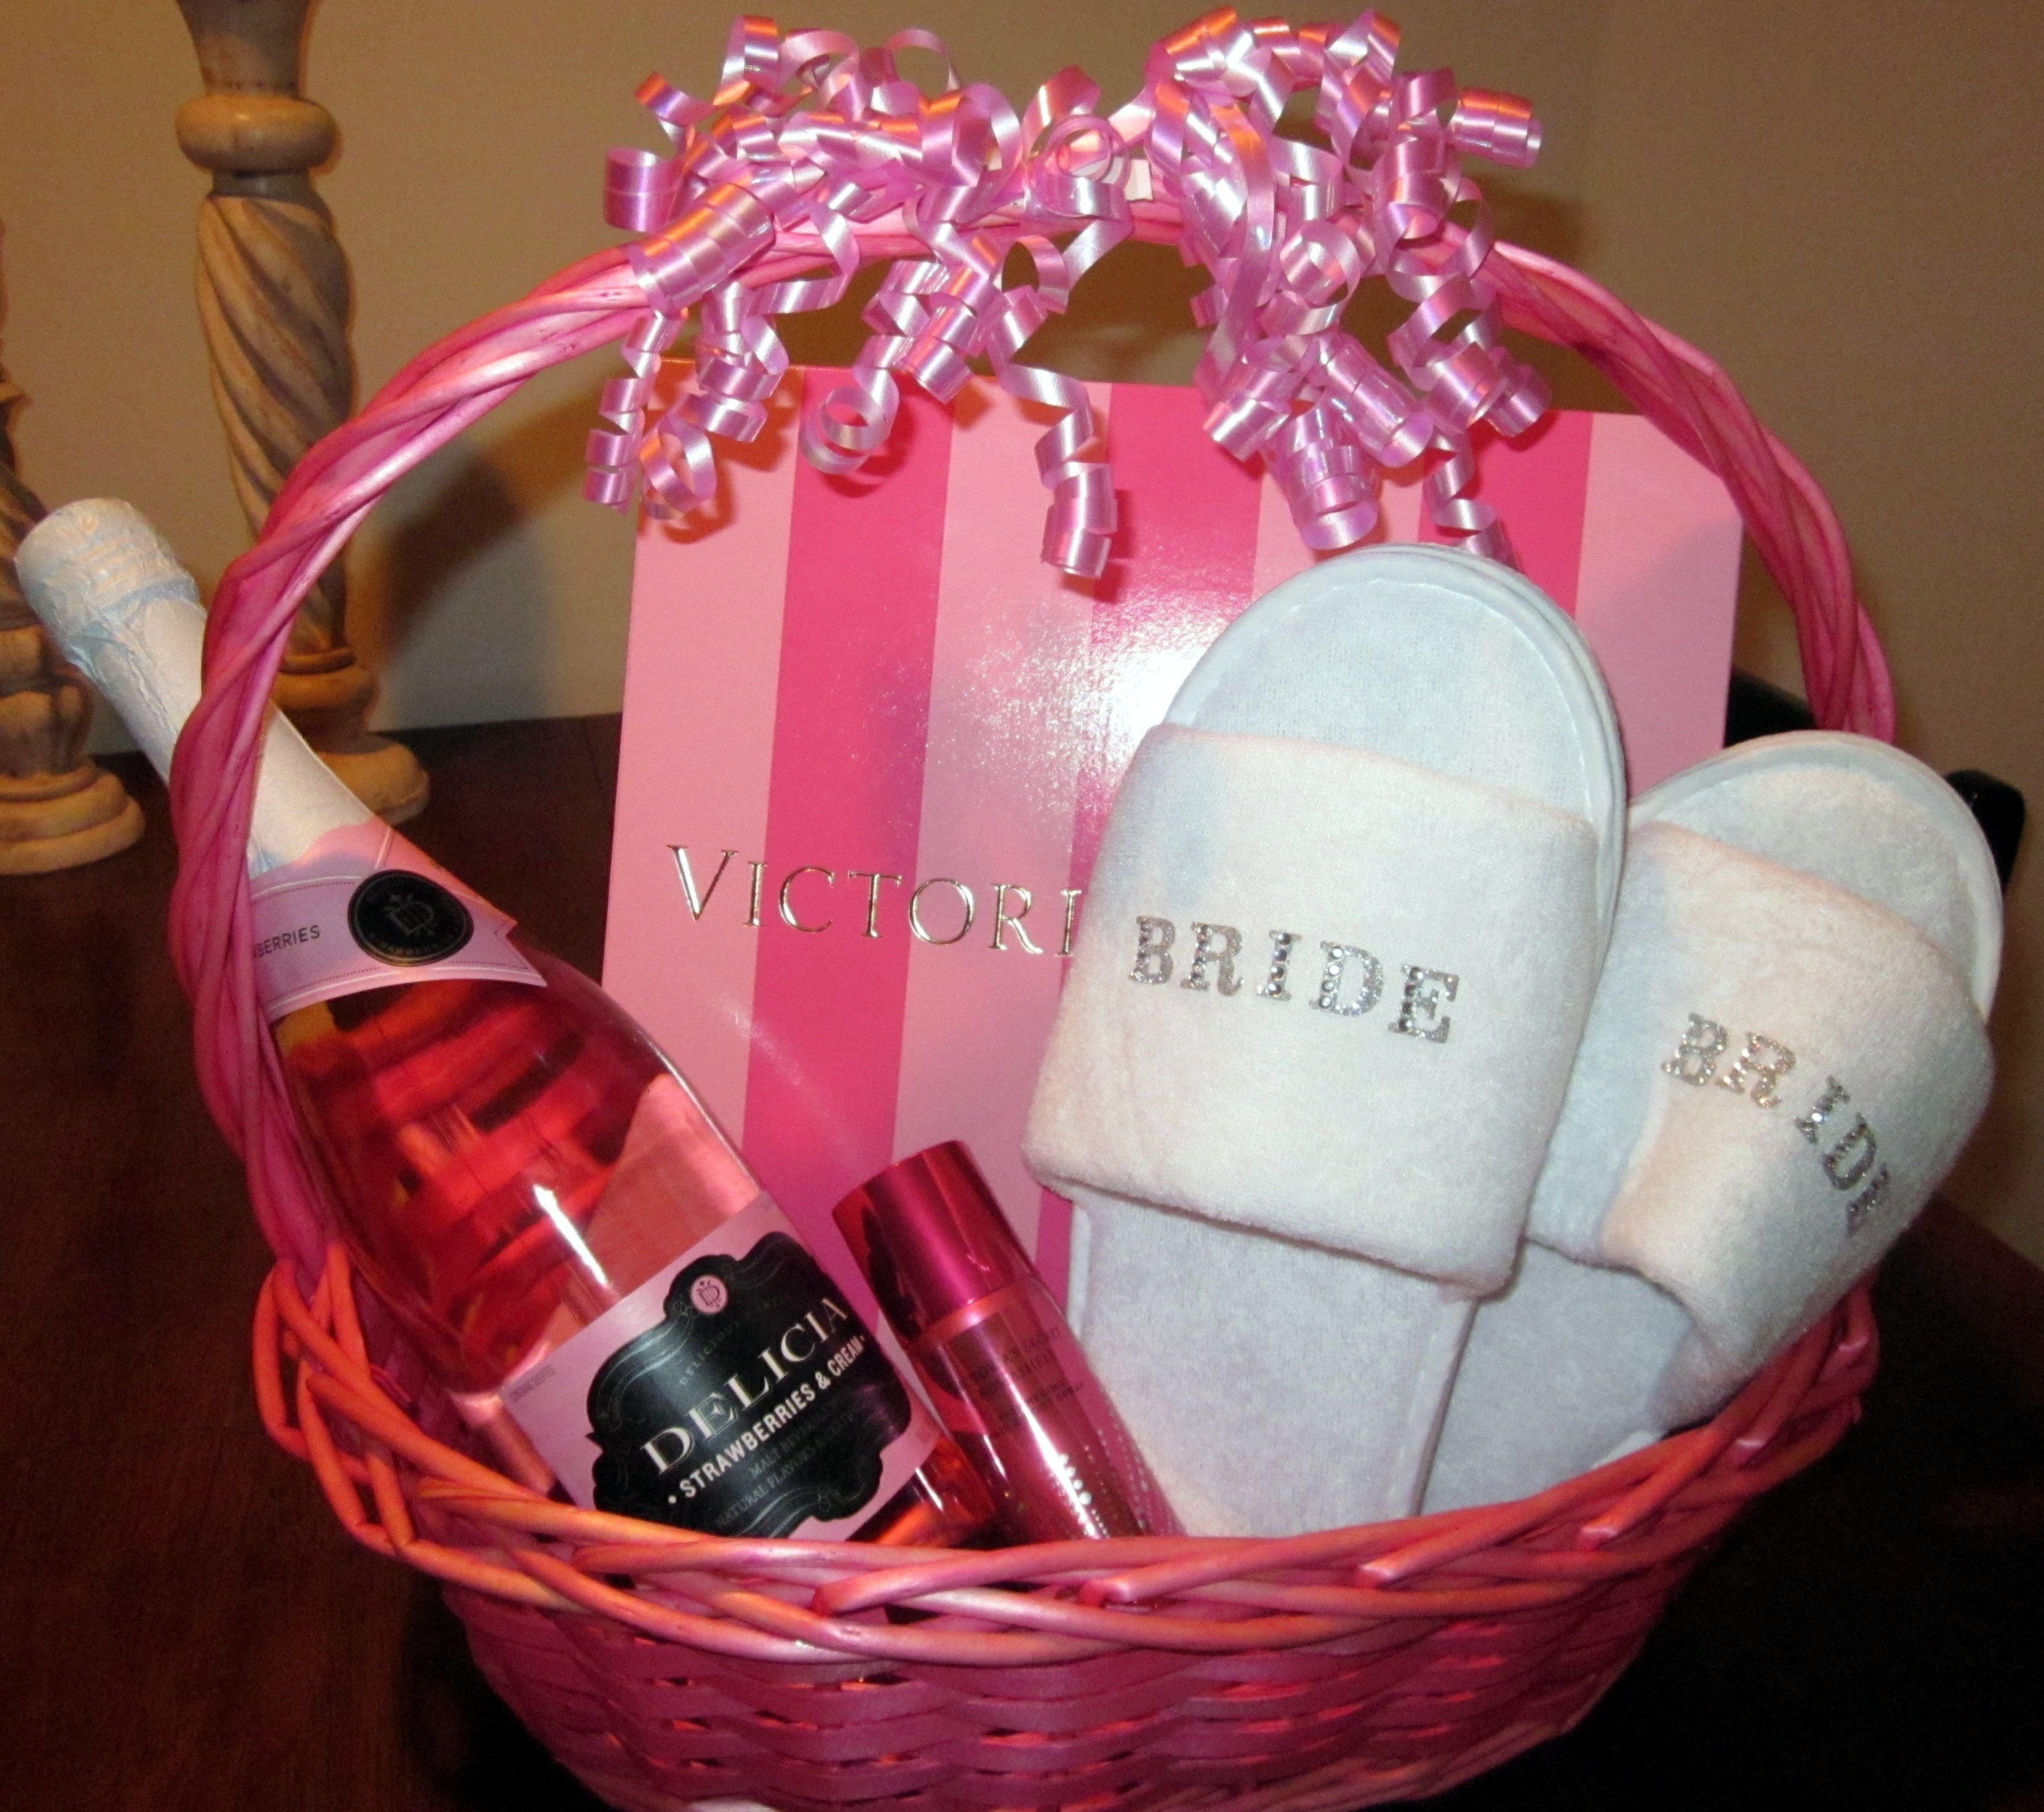 10 Ideal Bridal Shower Gift Basket Ideas bridal shower gift ideas shell adore spa slippers wedding 3 2022